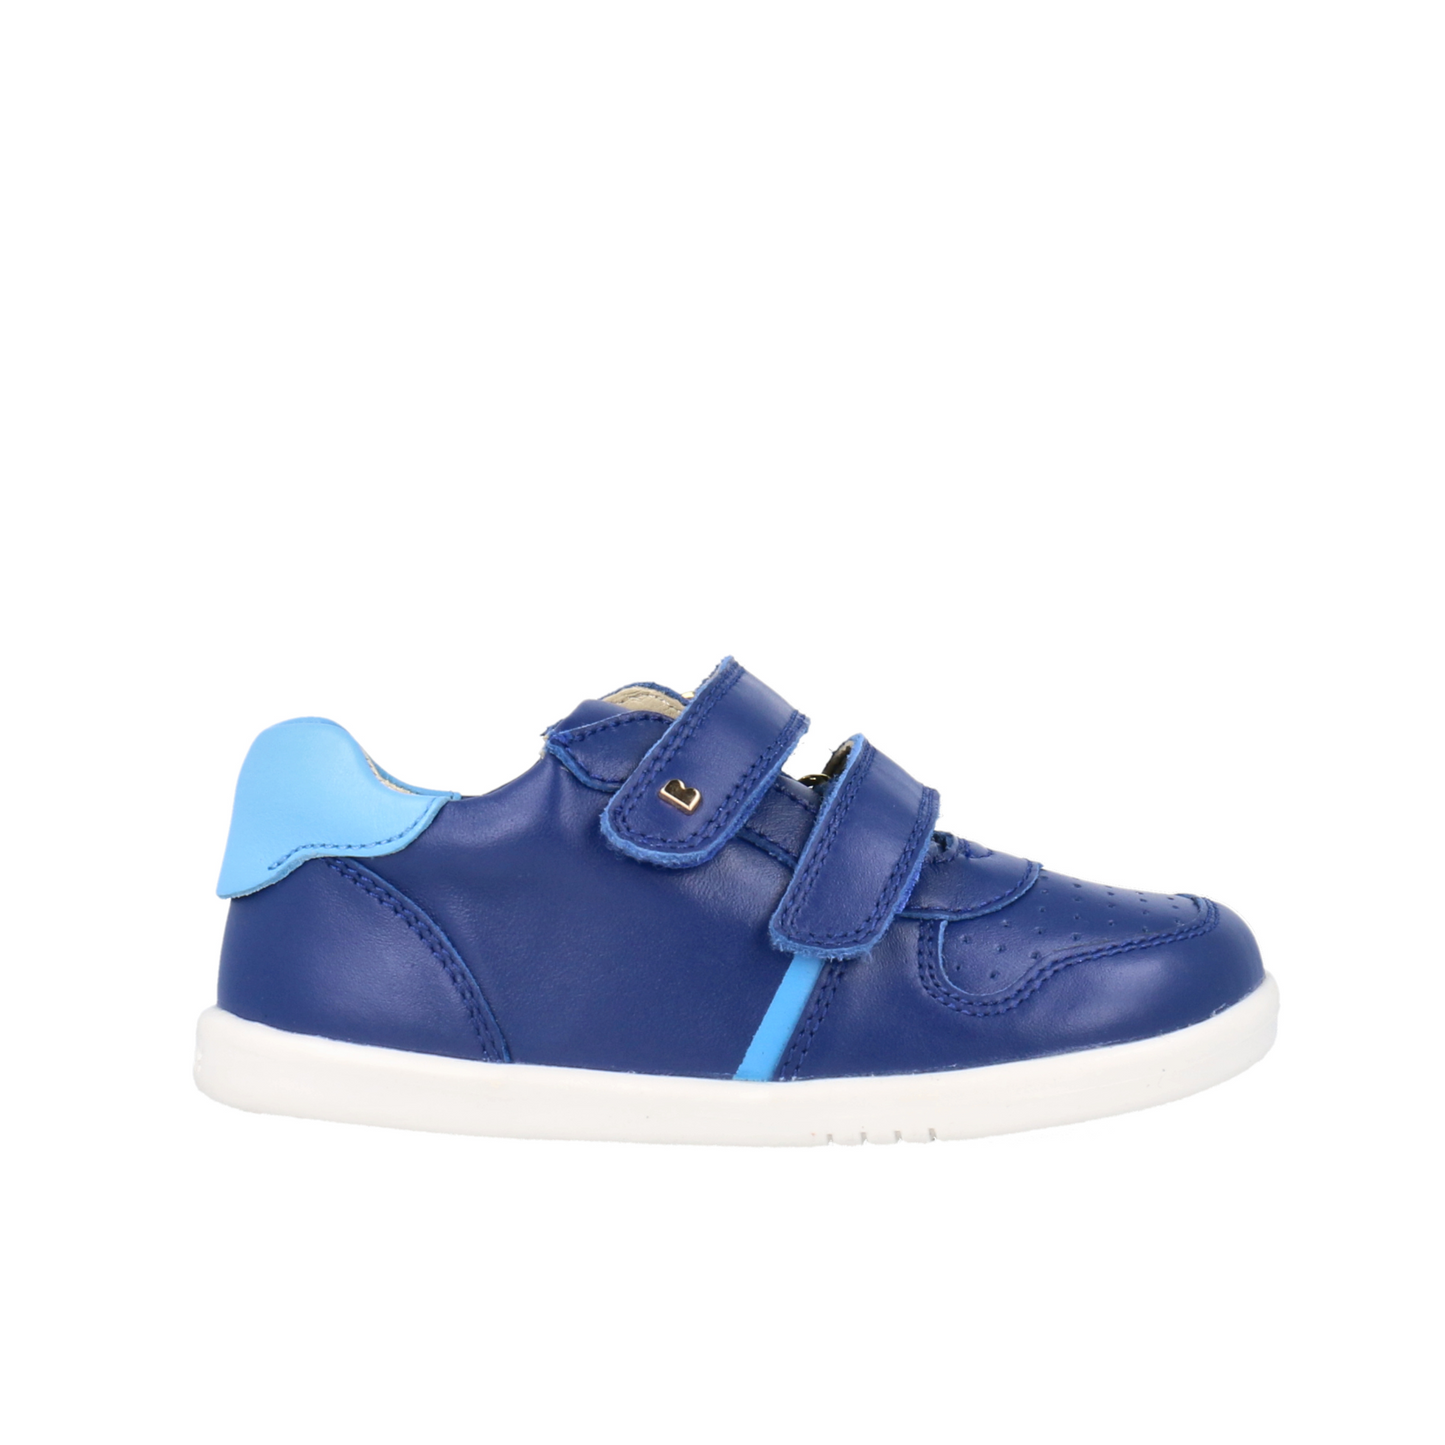 IW Riley Leather Sneaker Shoe in Blueberry and Powder Blue